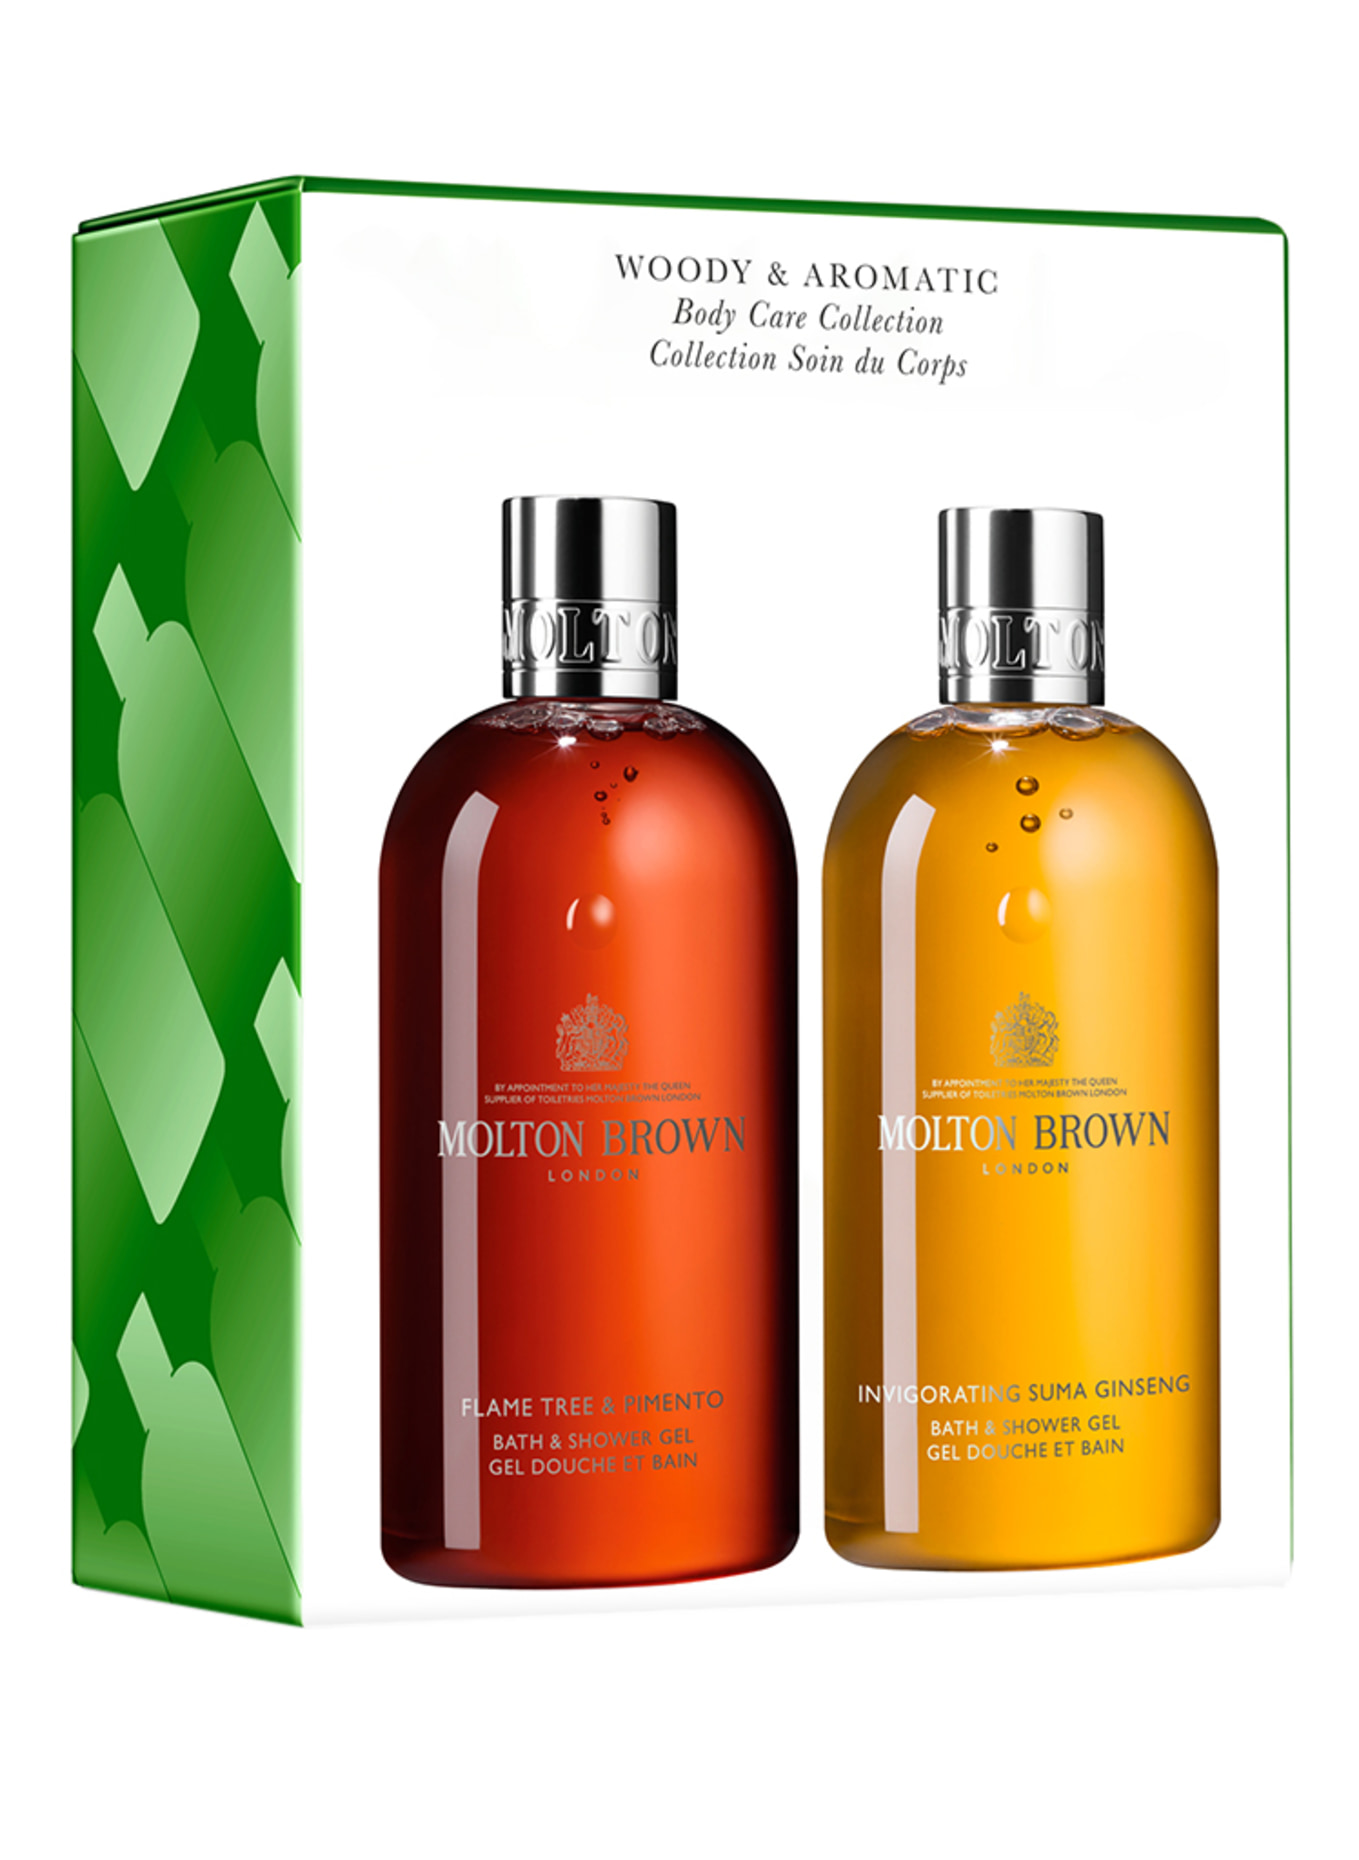 MOLTON BROWN WOODY & AROMATIC BODY CARE COLLECTION (Obrazek 1)